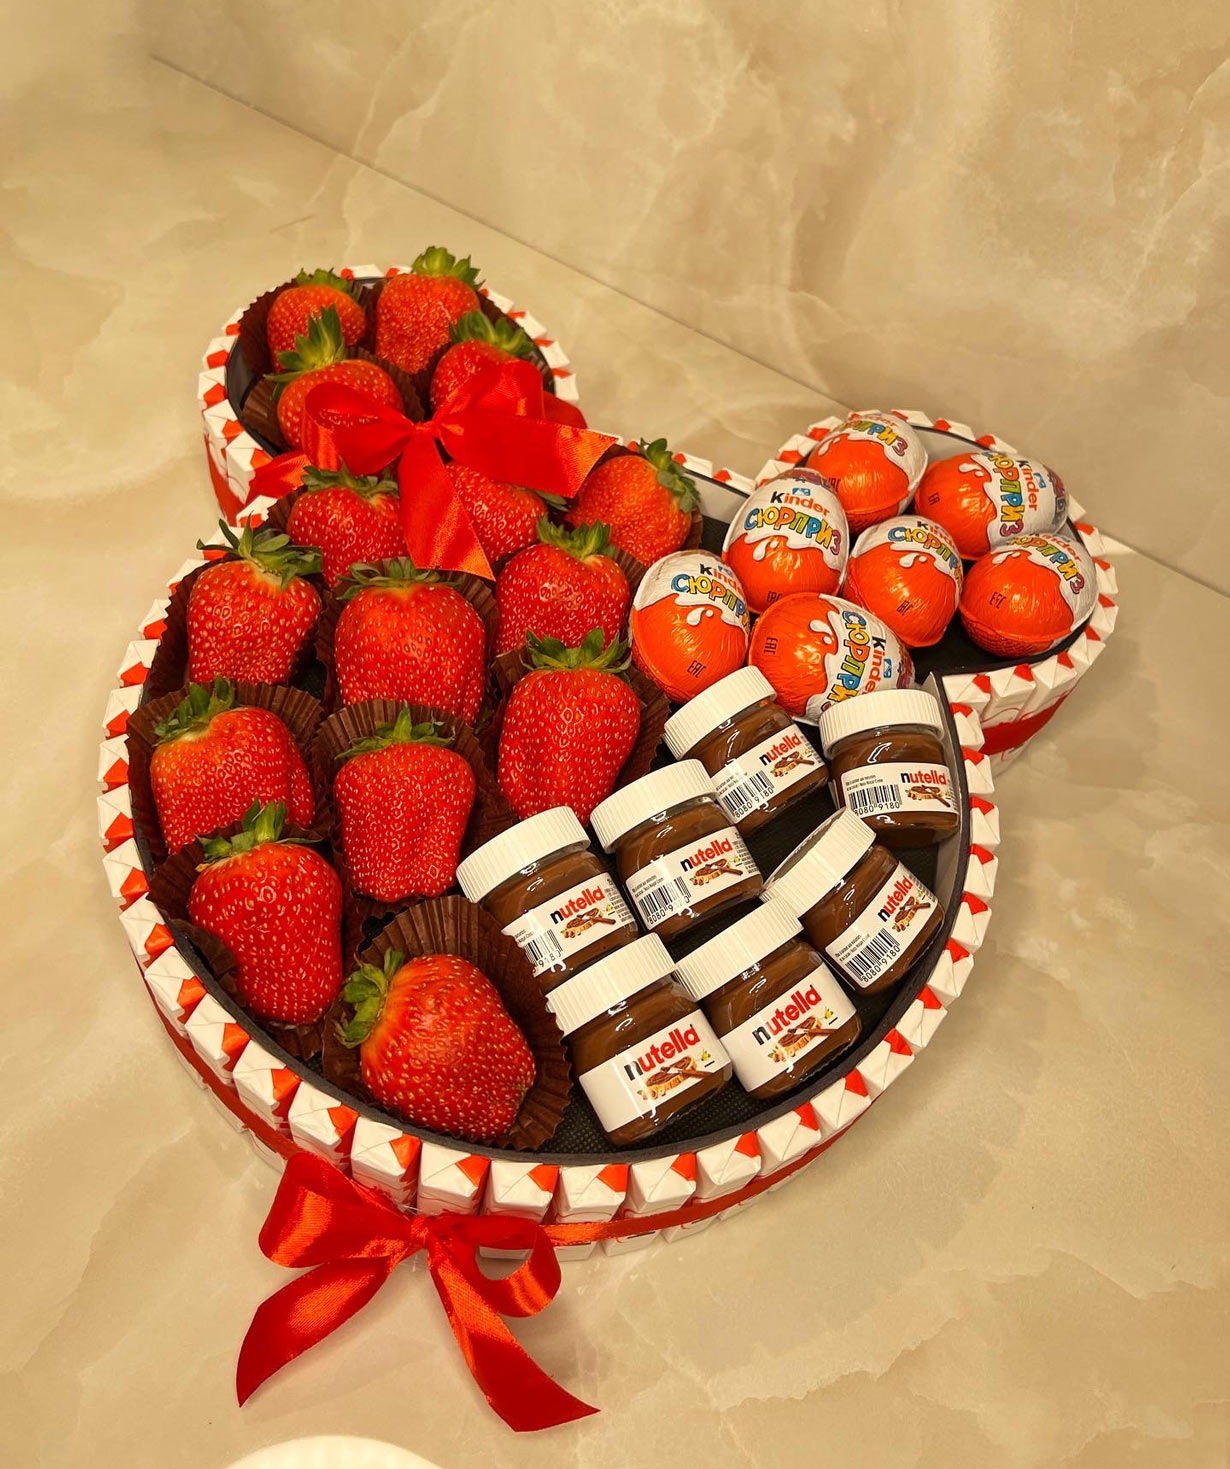 Composition Mickey Mouse `Sweet Elak` with strawberries and nutella